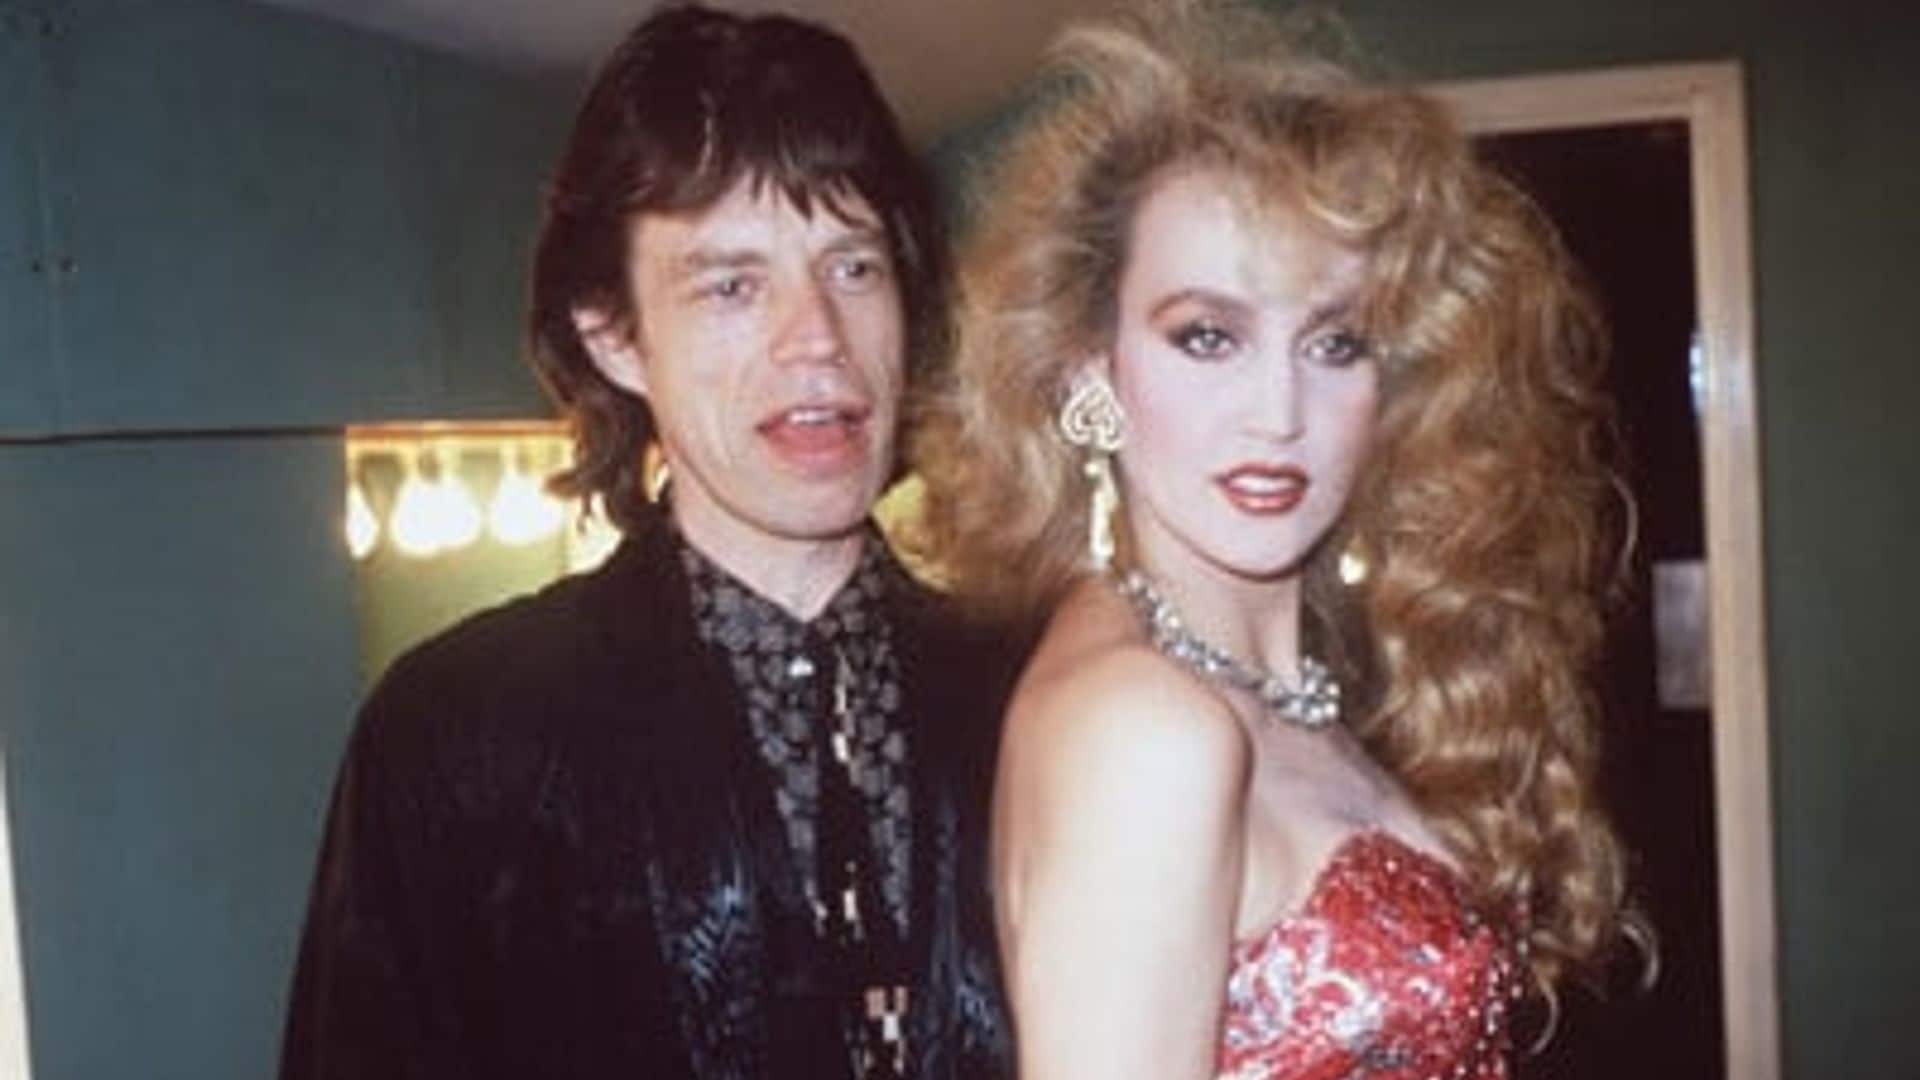 Jerry Hall on ex Mick Jagger: I have no regrets